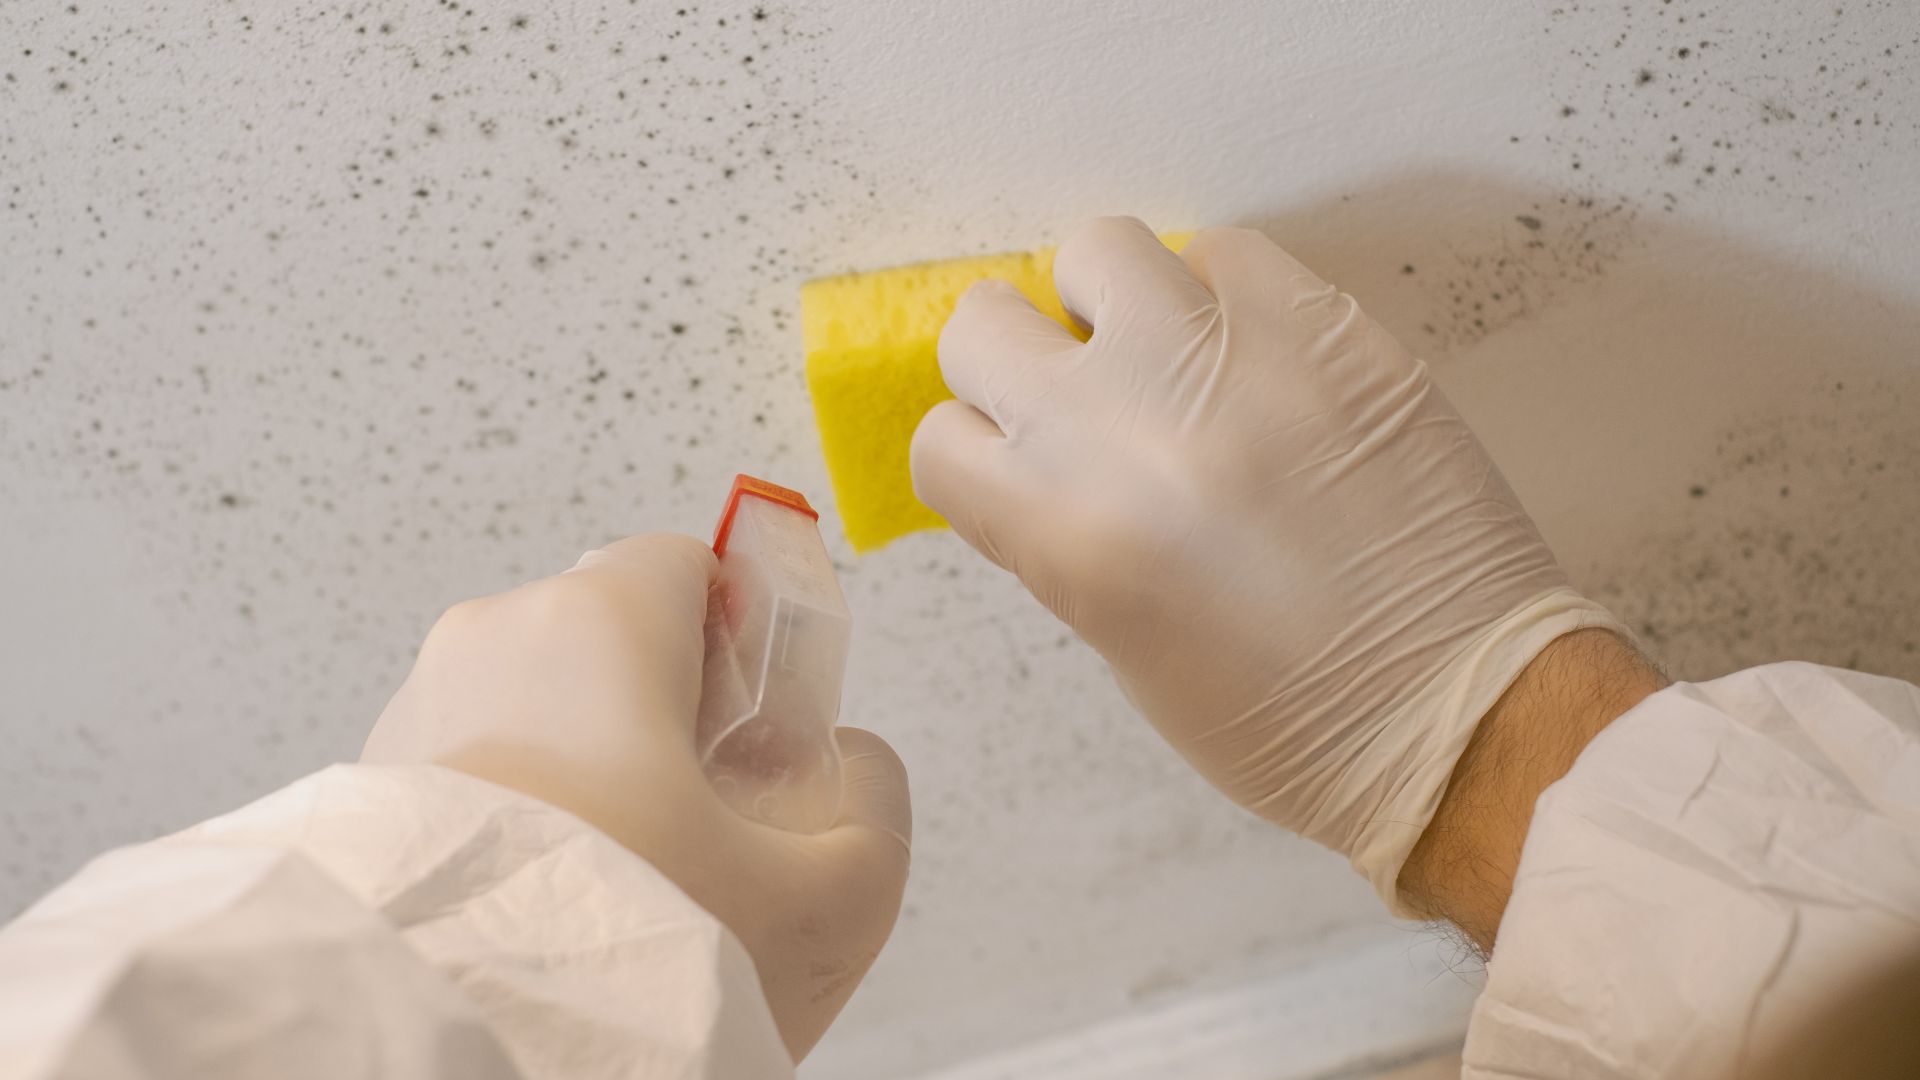 Recognizing Issues with Mold and Engaging Plumbers